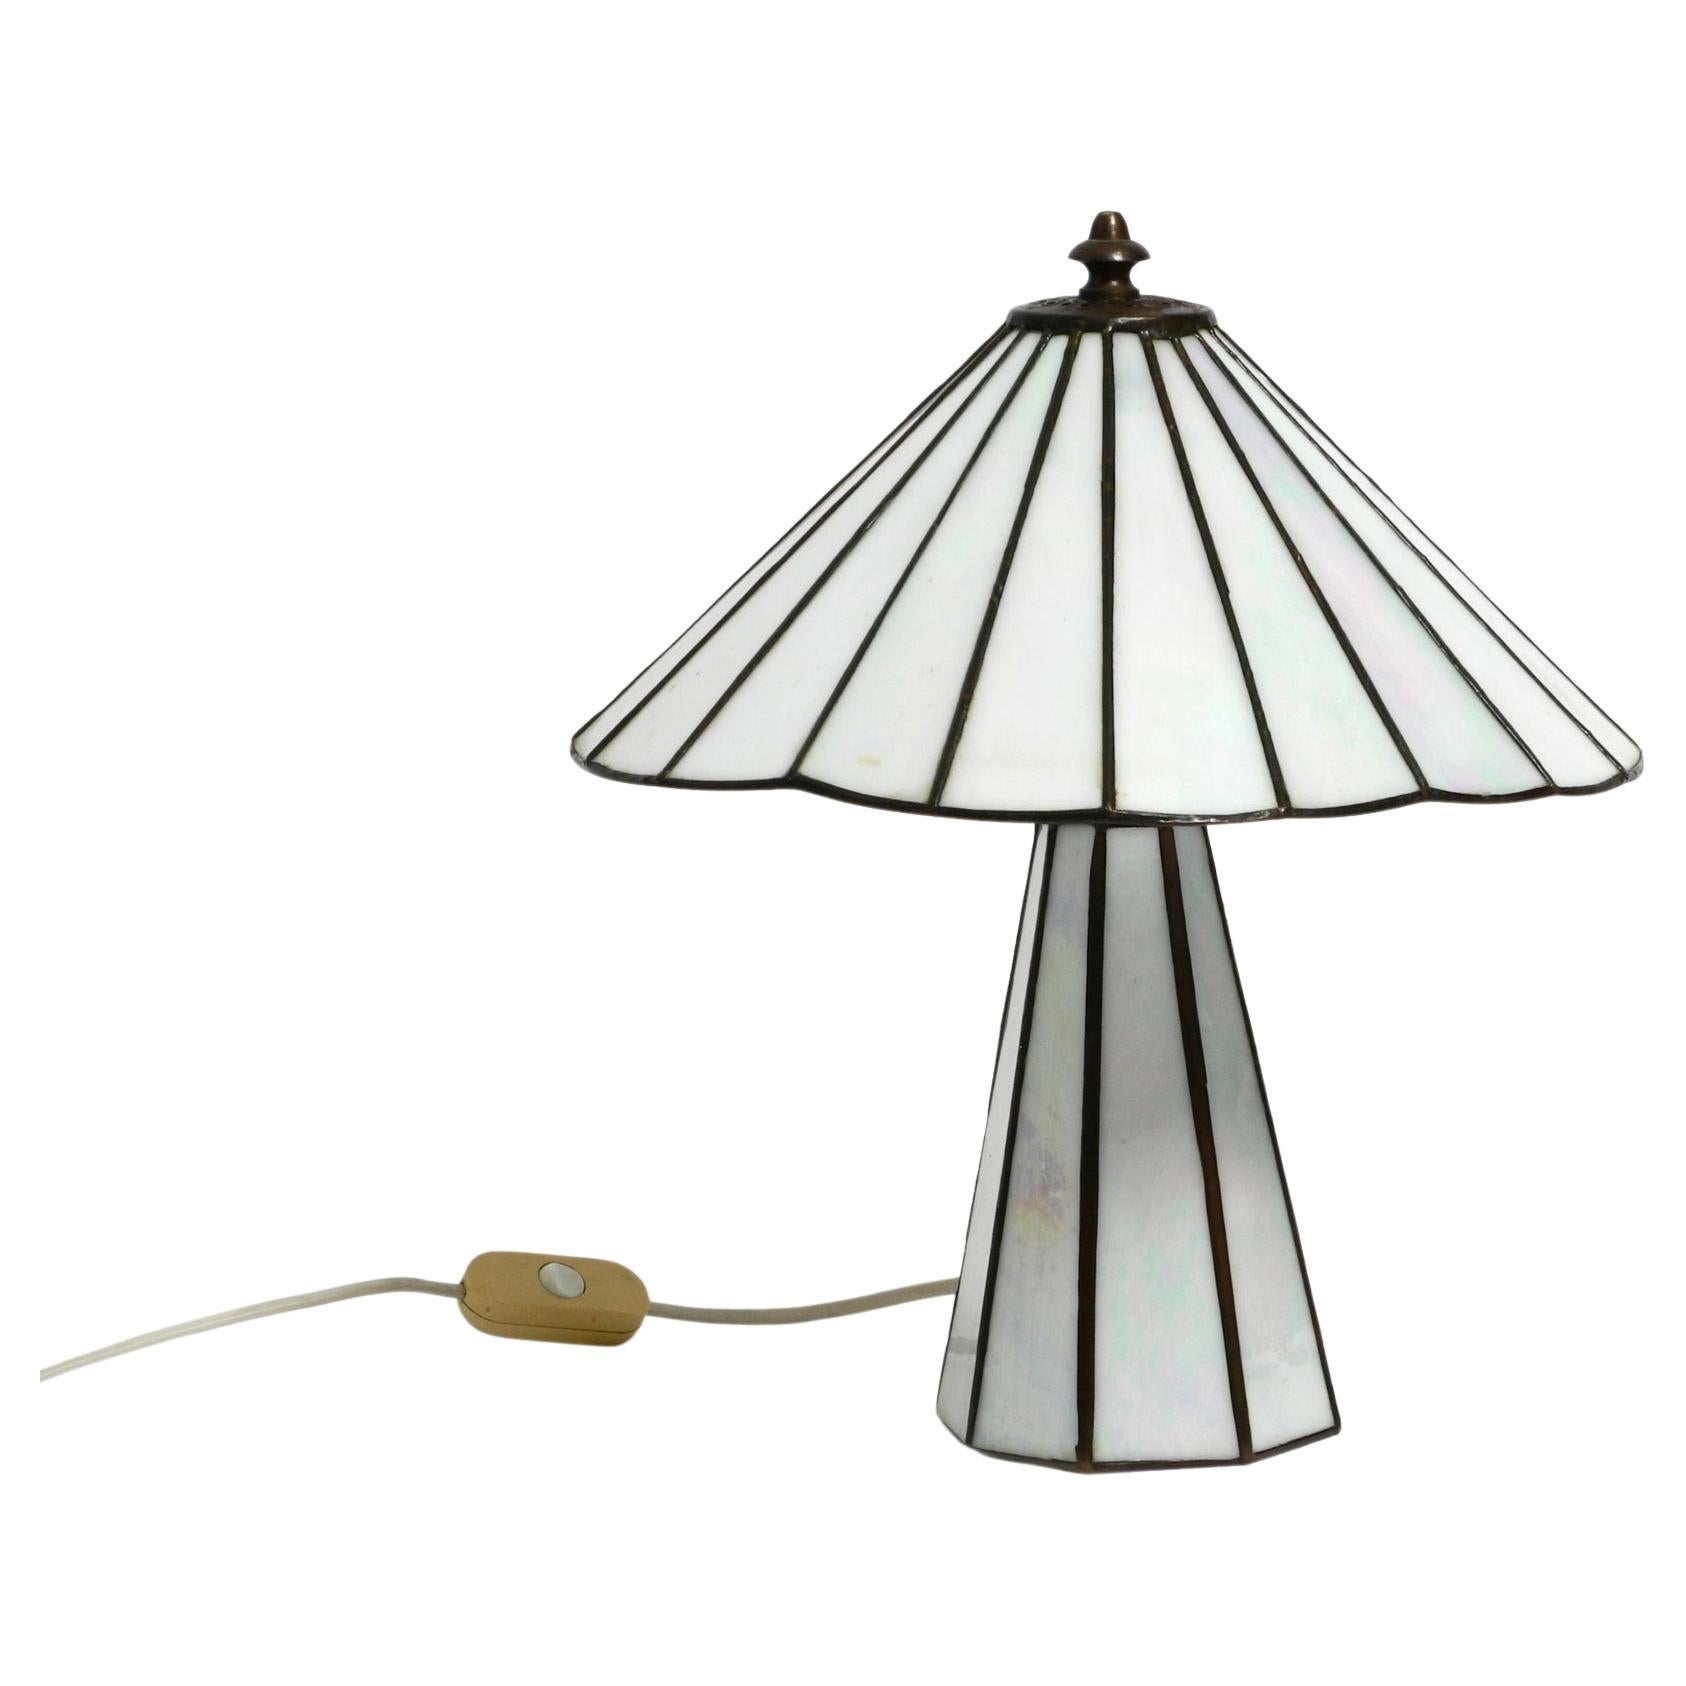 Beautiful Little 70s Tiffany Design Table Lamp Made of Mother-of-pearl Glass